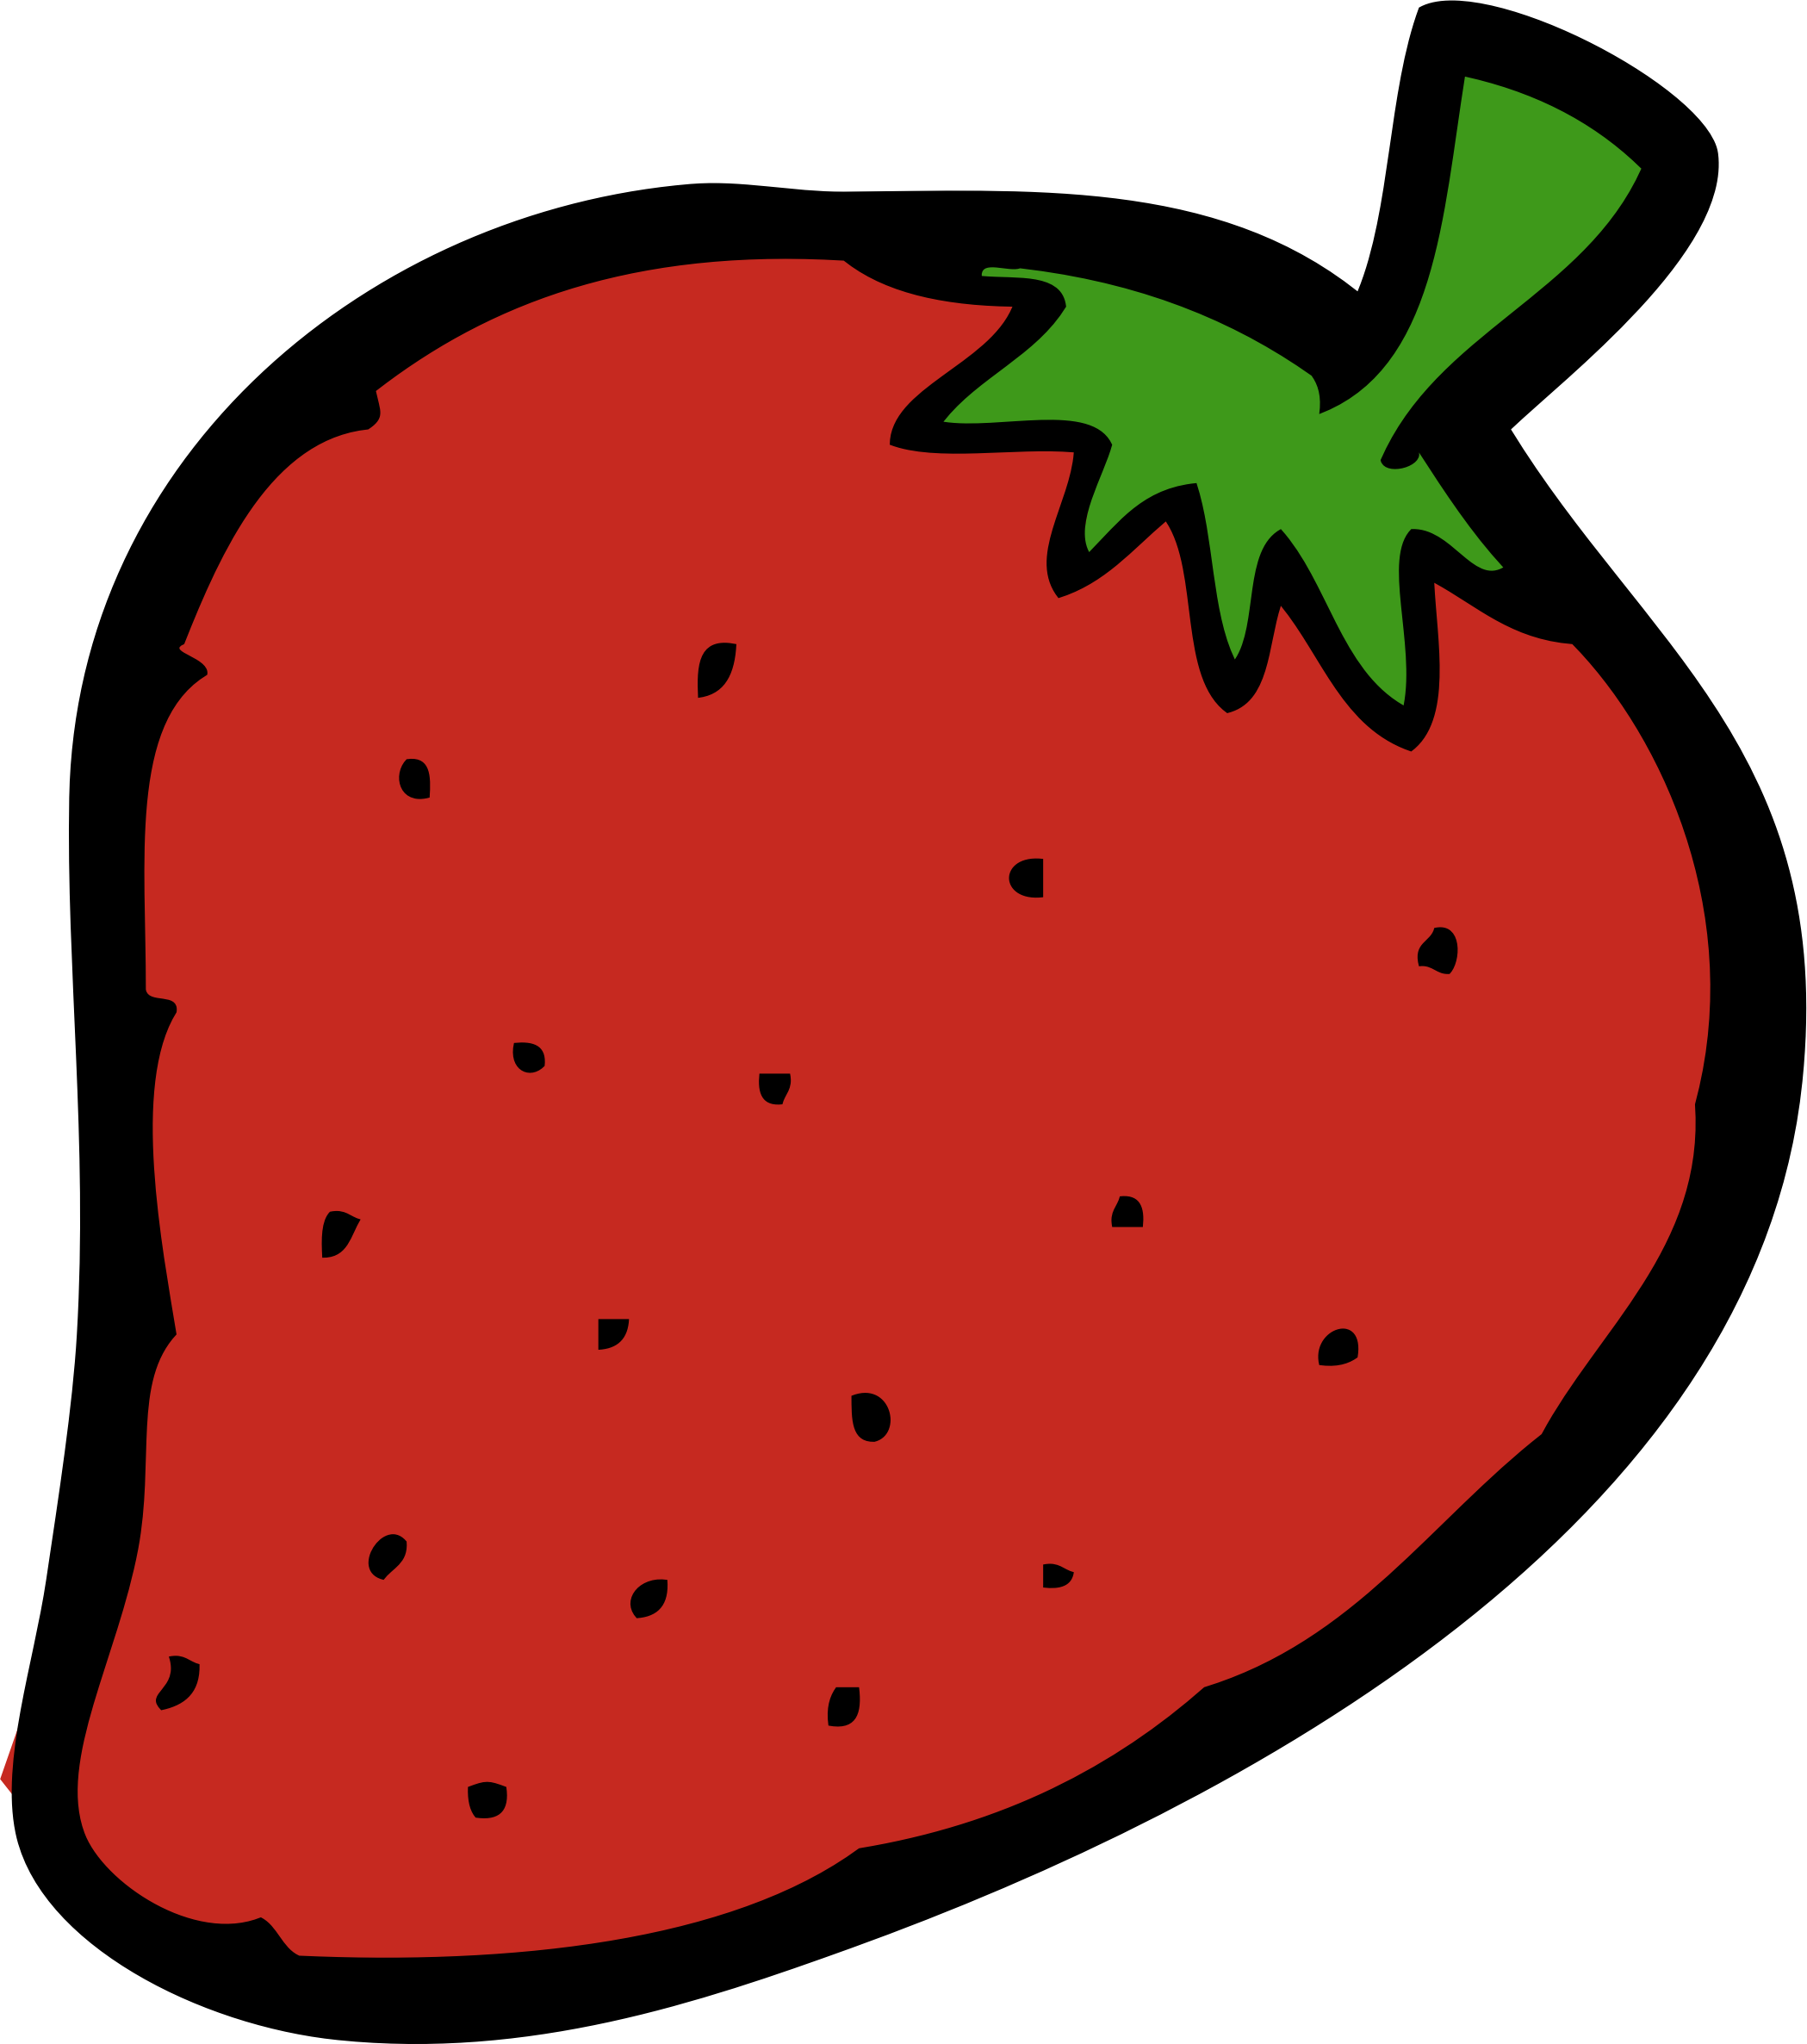 Fruit clipart strawberry. Big image png